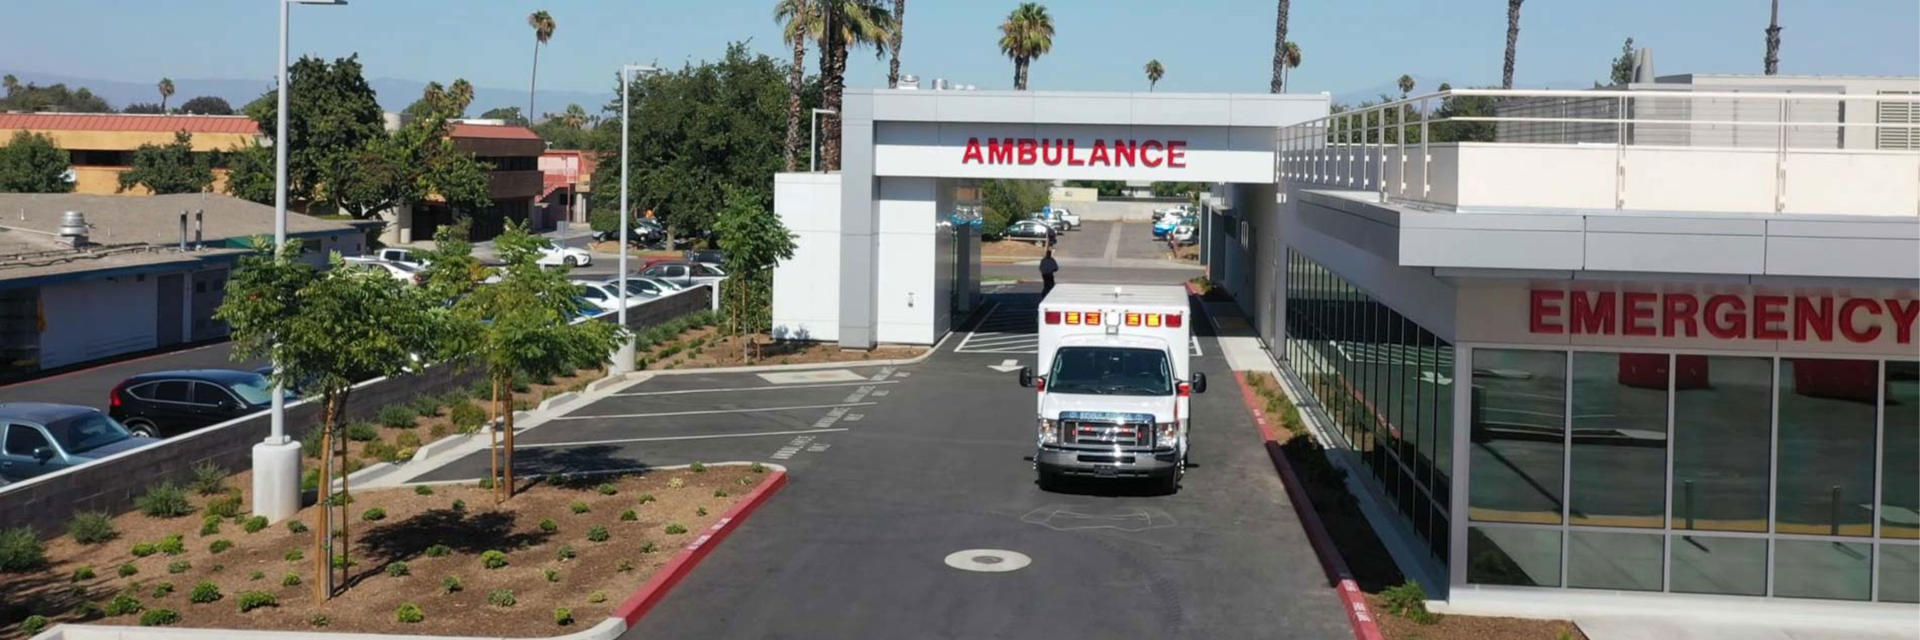 EMERGENCY entrance showing the side of hospital of an ambulance and overhead that says: AMBULANCE.